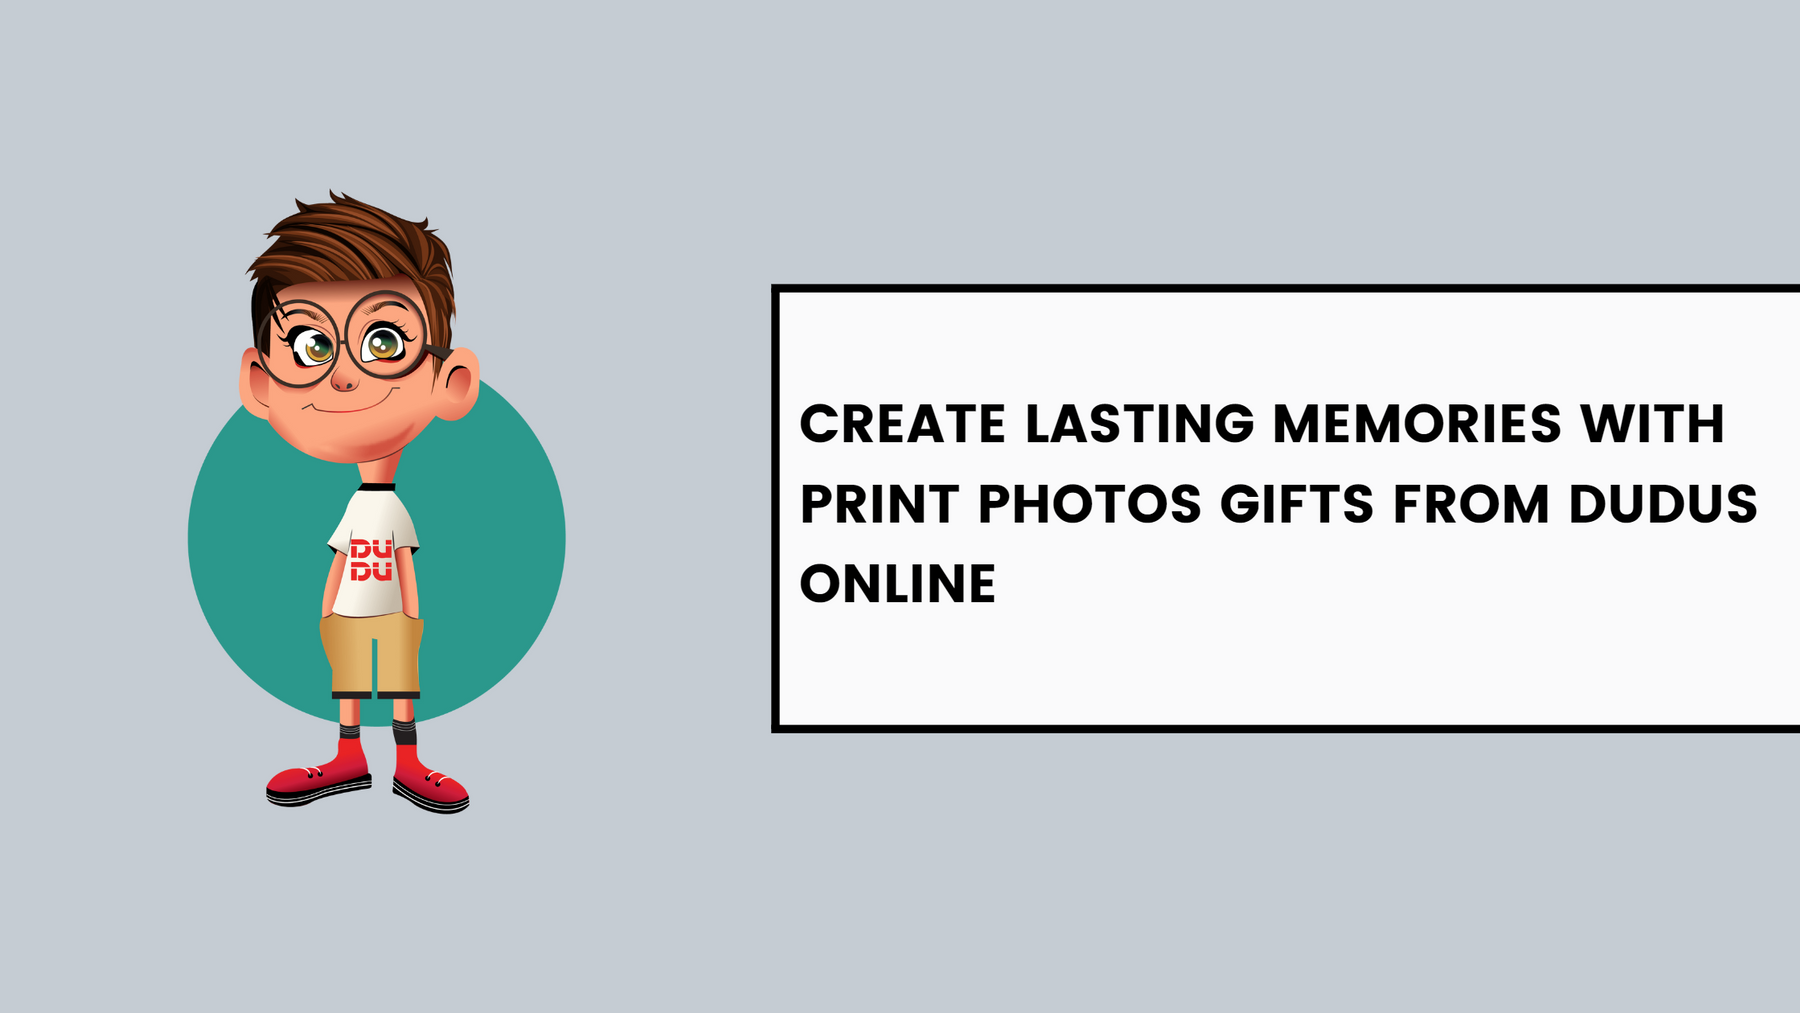 Create Lasting Memories with Print Photos Gifts from Dudus Online